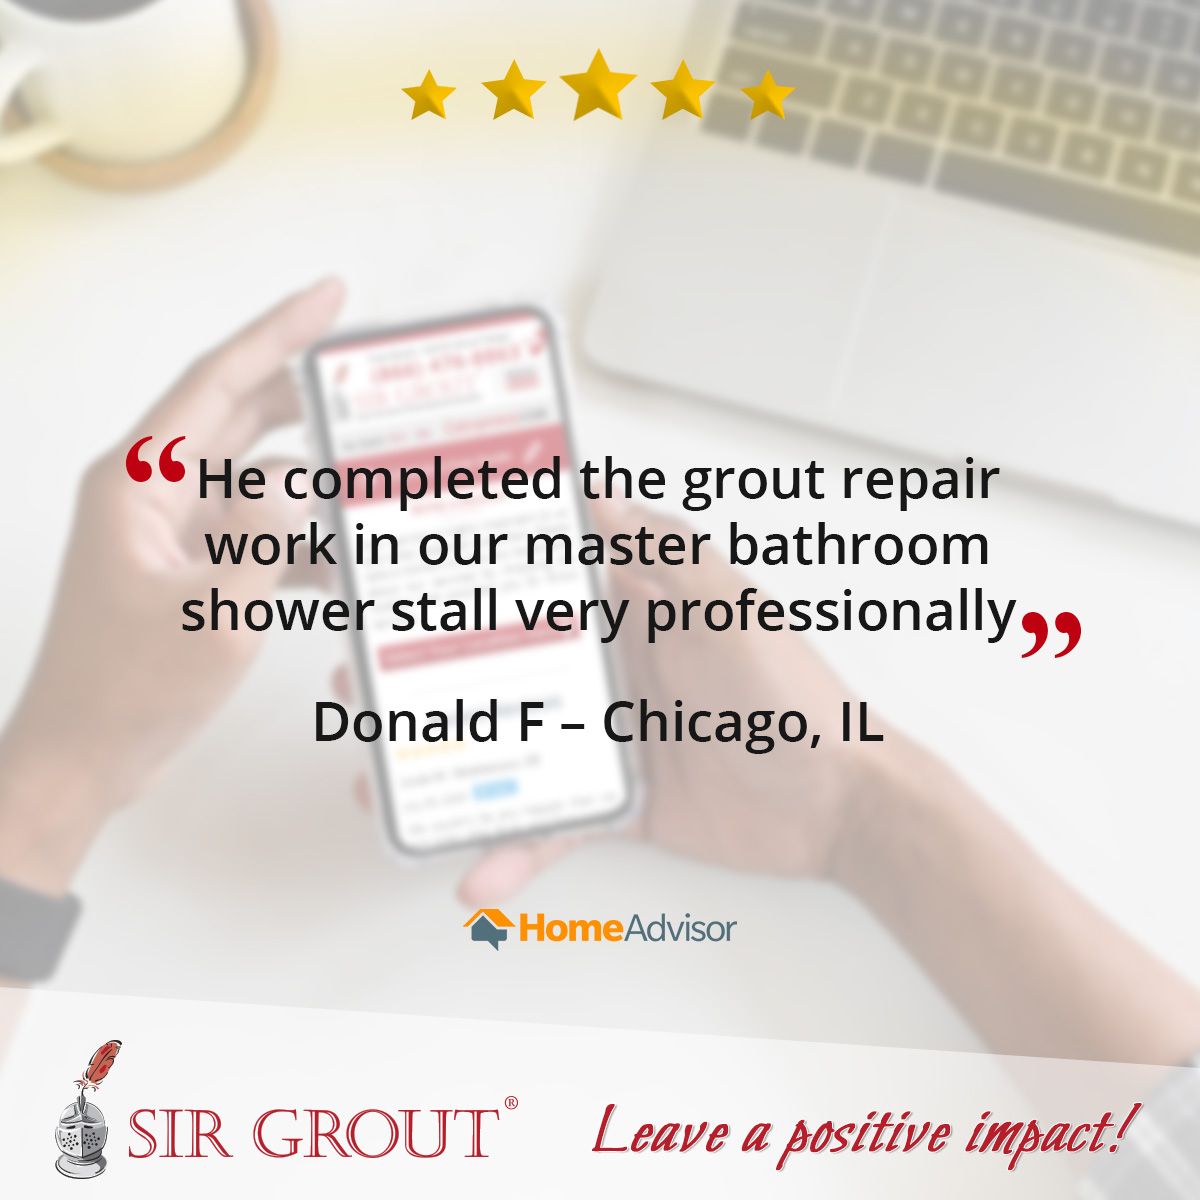 He completed the grout repair work in our master bathroom shower stall very professionally